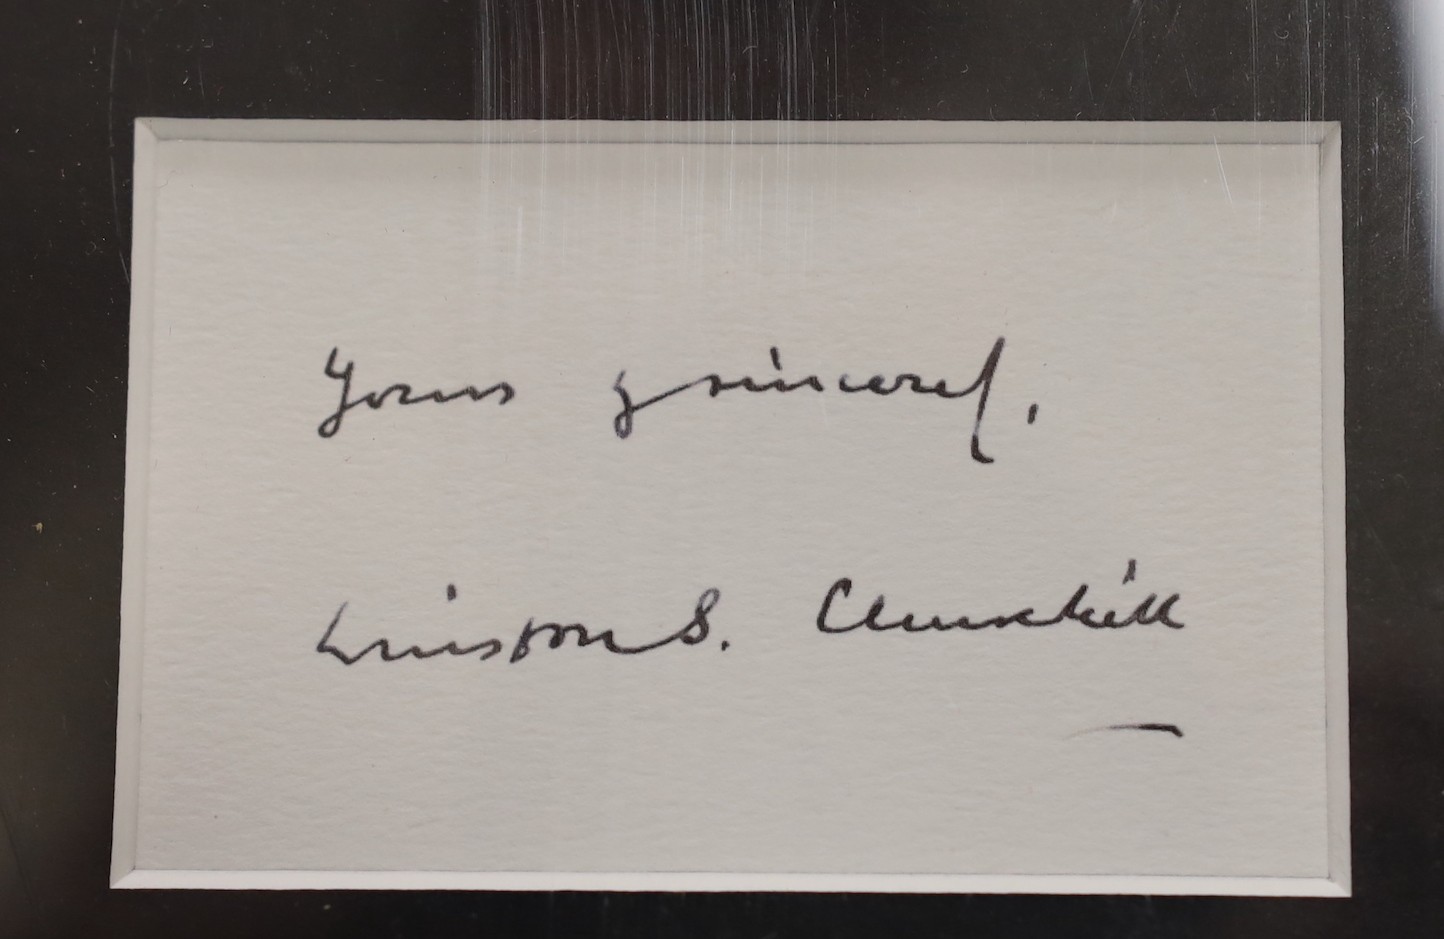 Churchill, W. History of the English Speaking People, 1st Edition 1956, and a photo of Churchill with facsimile signature